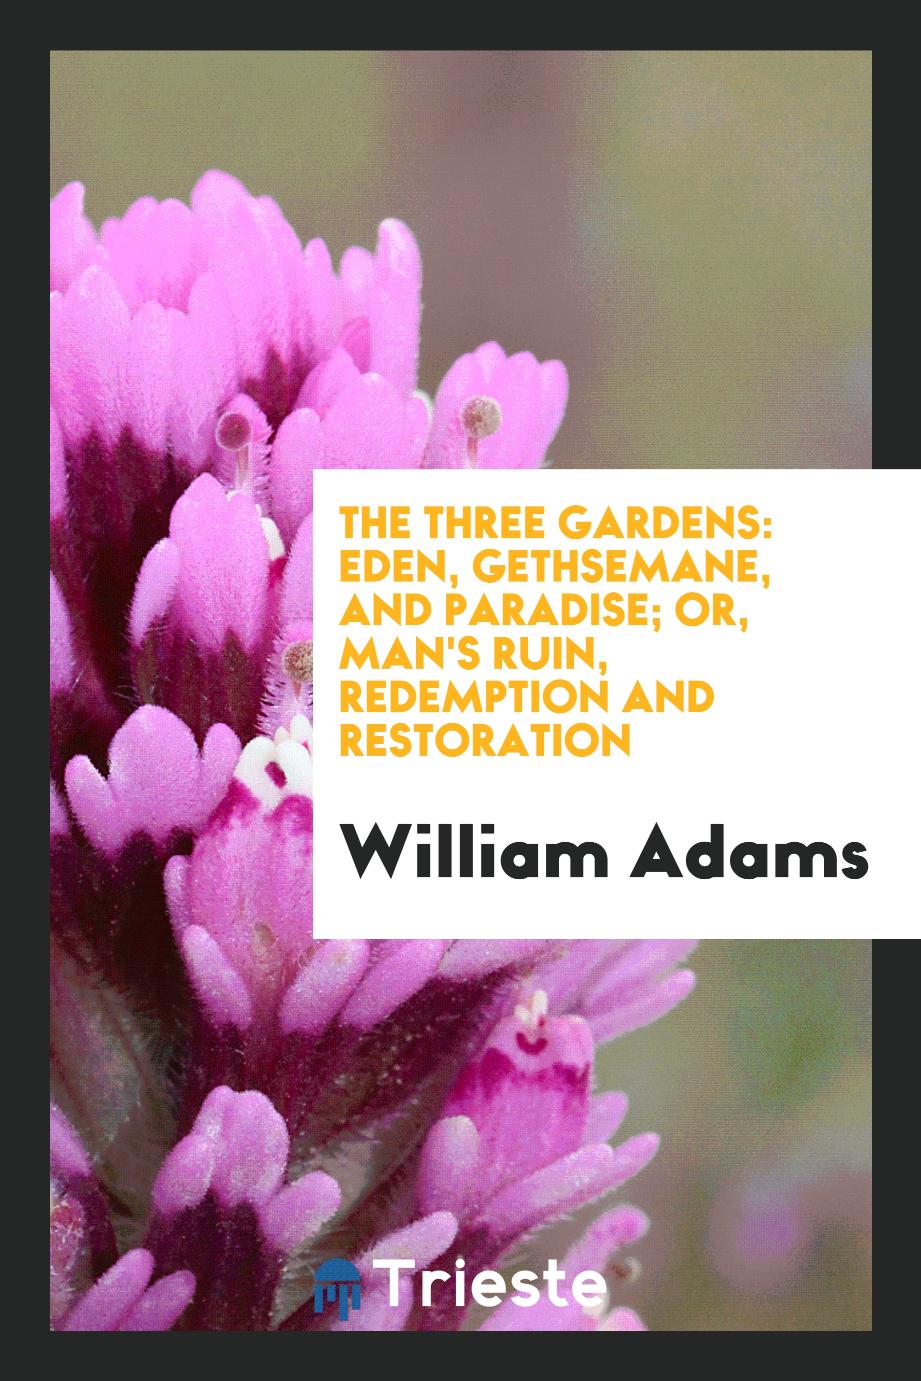 The three gardens: Eden, Gethsemane, and Paradise; or, Man's ruin, redemption and restoration